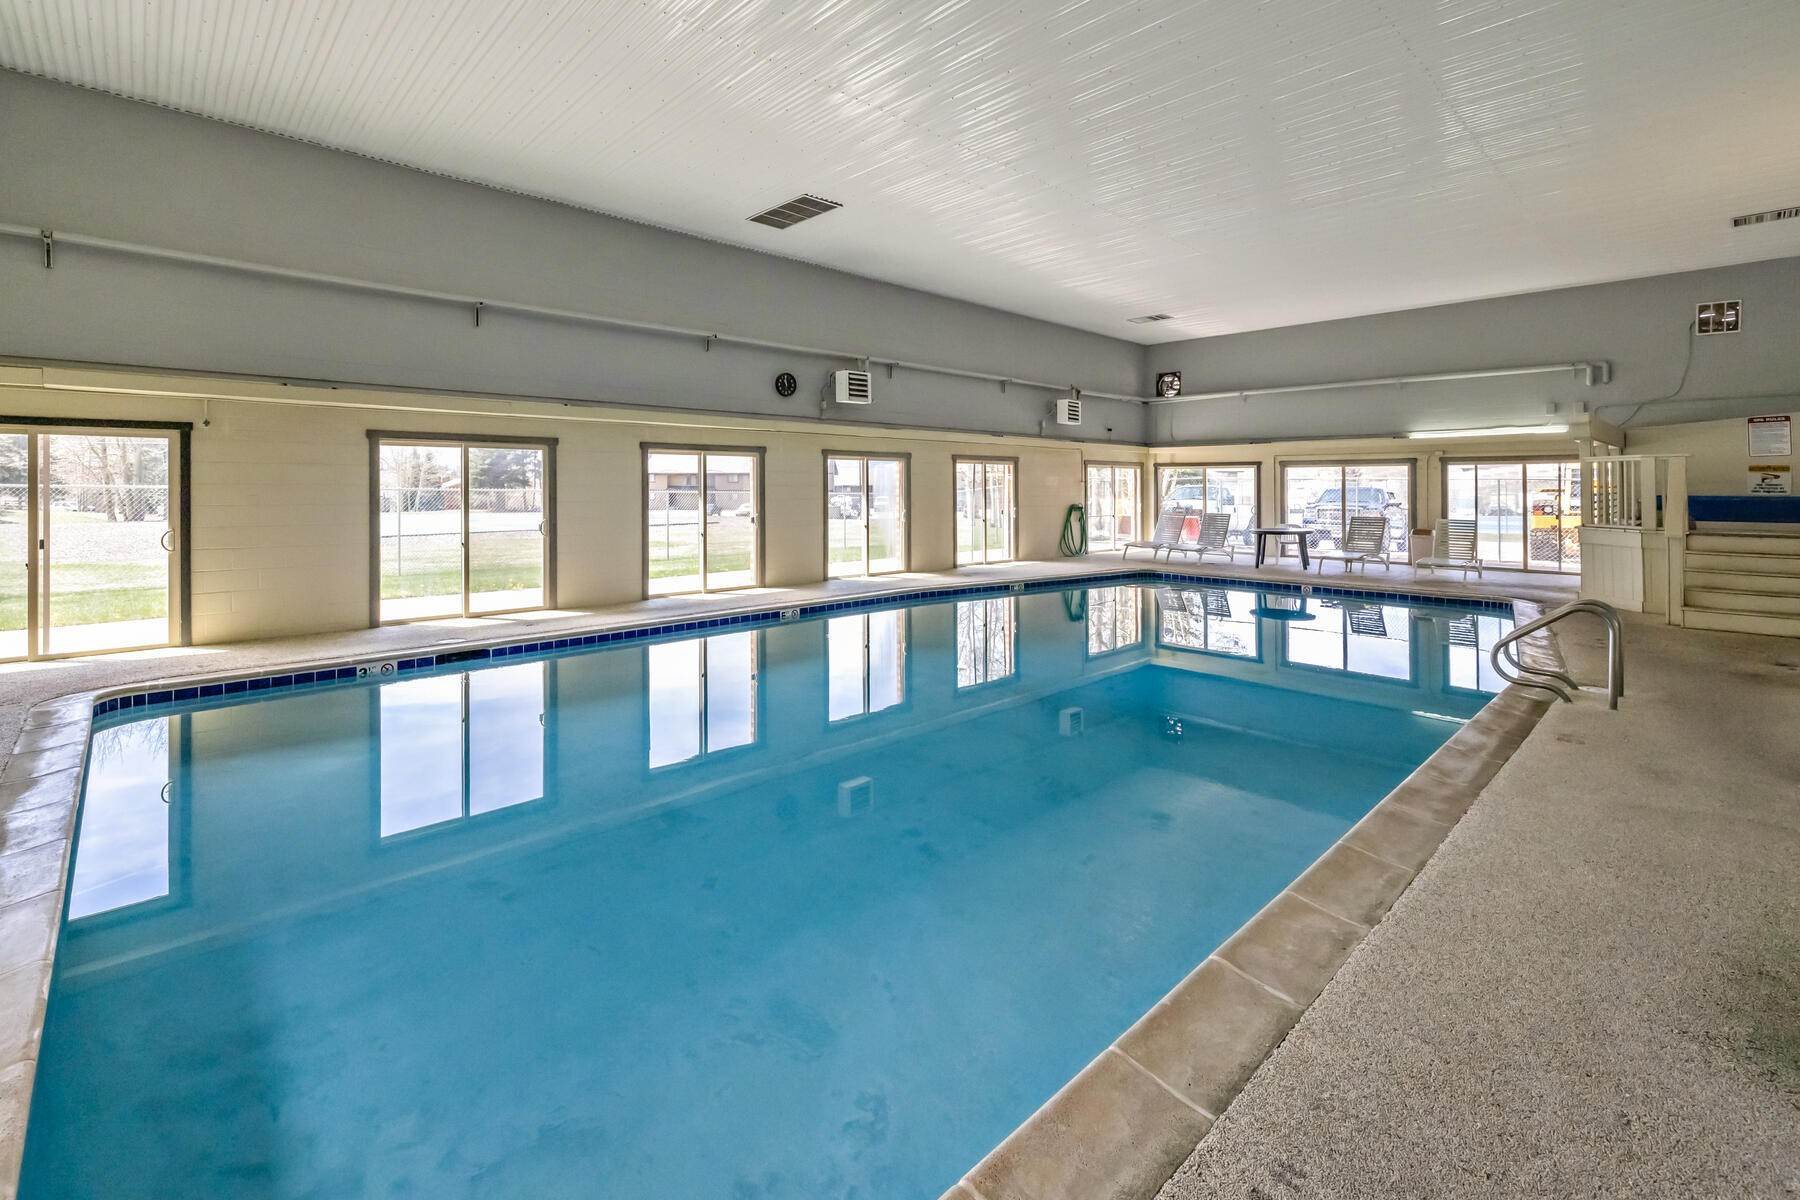 22. Condominiums for Active at 803 Straight Creek Drive Bldg Z Unit 106, Dillon, CO 80435 803 Straight Creek Drive Bldg Z Unit 106 Dillon, Colorado 80435 United States